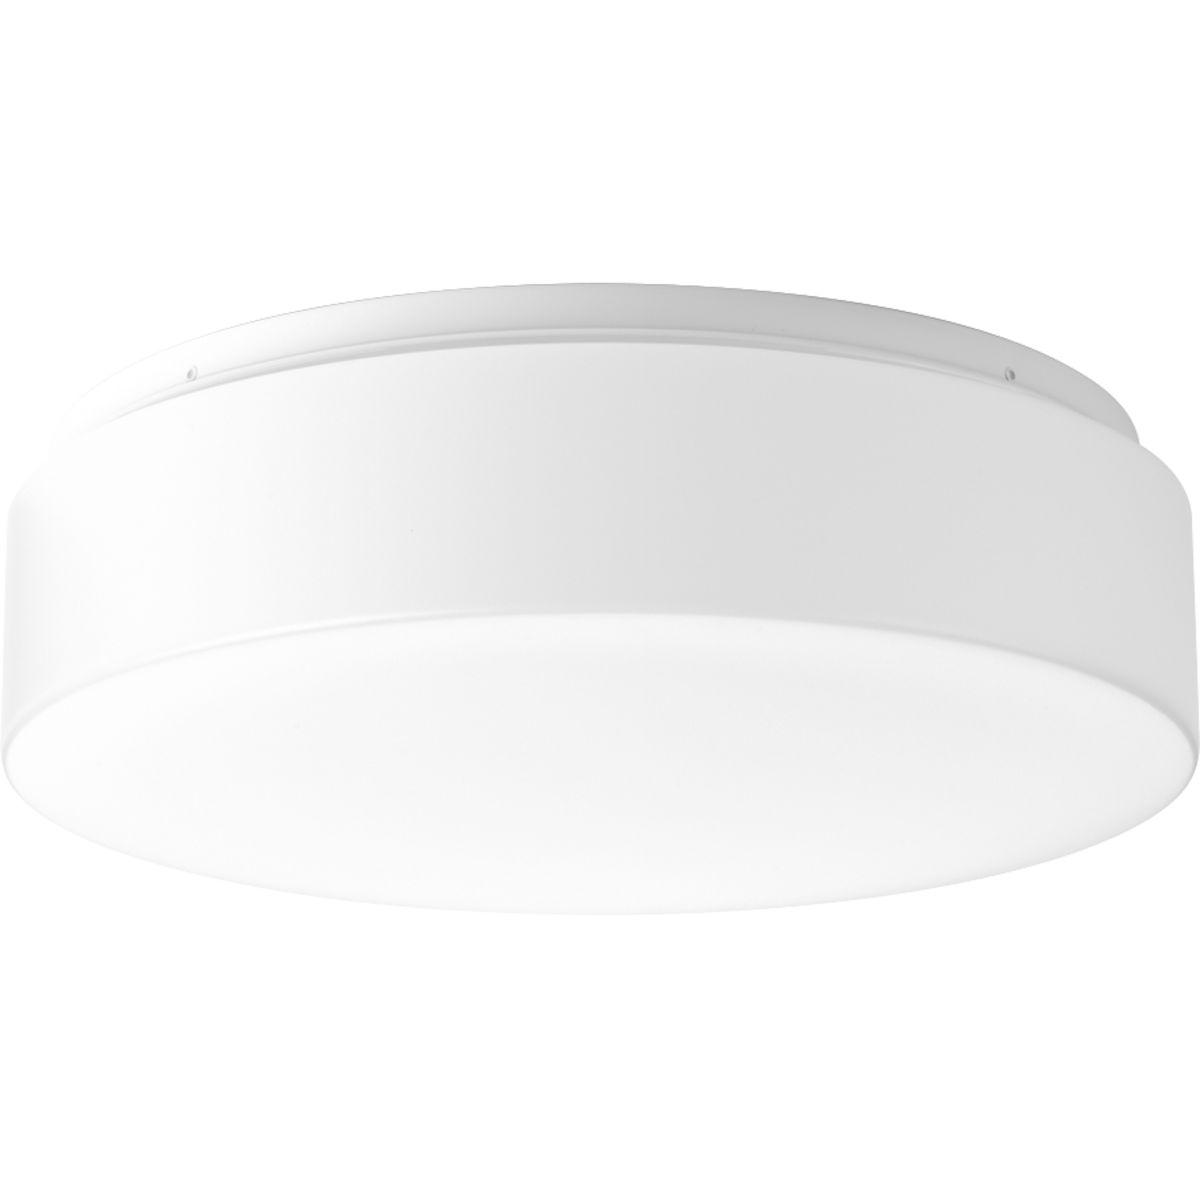 Hubbell P730002-030-30 LED flush mount with white acrylic diffuser mounts to baked enamel ceiling pan. Twist on installation with a single locking thumb screw. UL approved for damp locations. Ceiling or wall mount. 2025 lumens, 90 lumens/watt (delivered), 3000K and 90CRI. ENERG